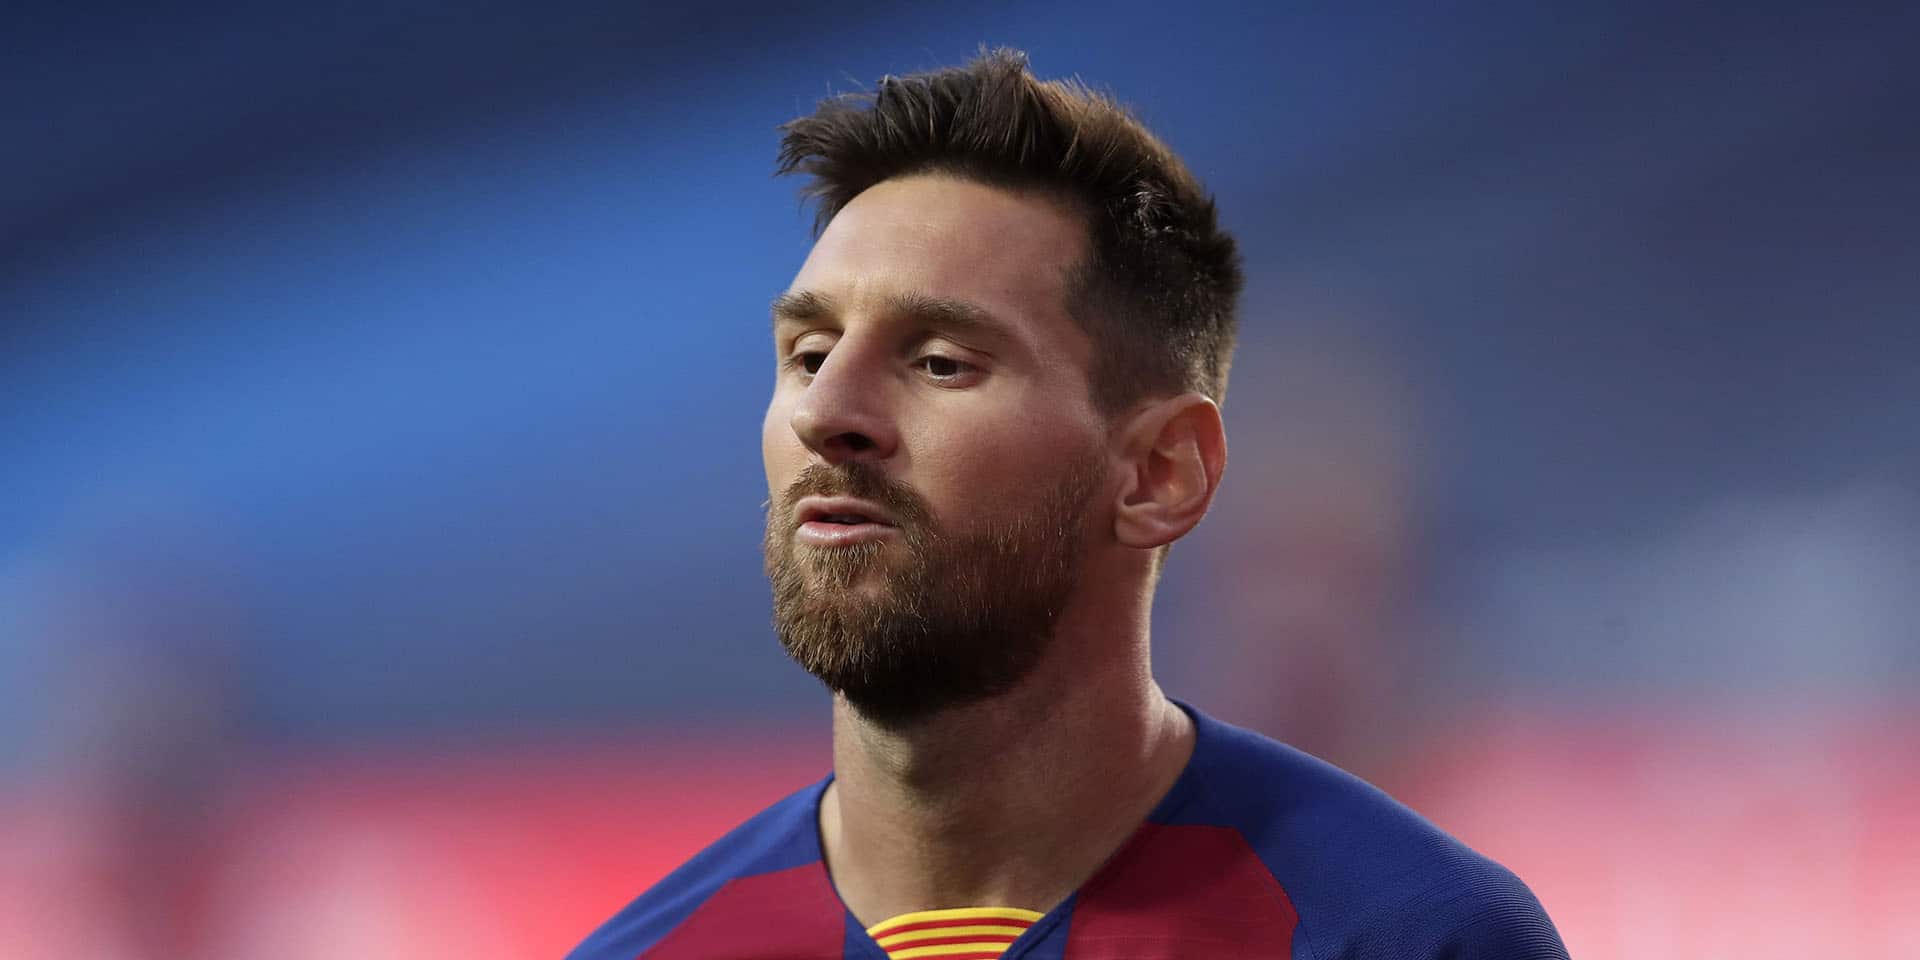 Who has Lionel Messi dated? Girlfriends List, Dating History